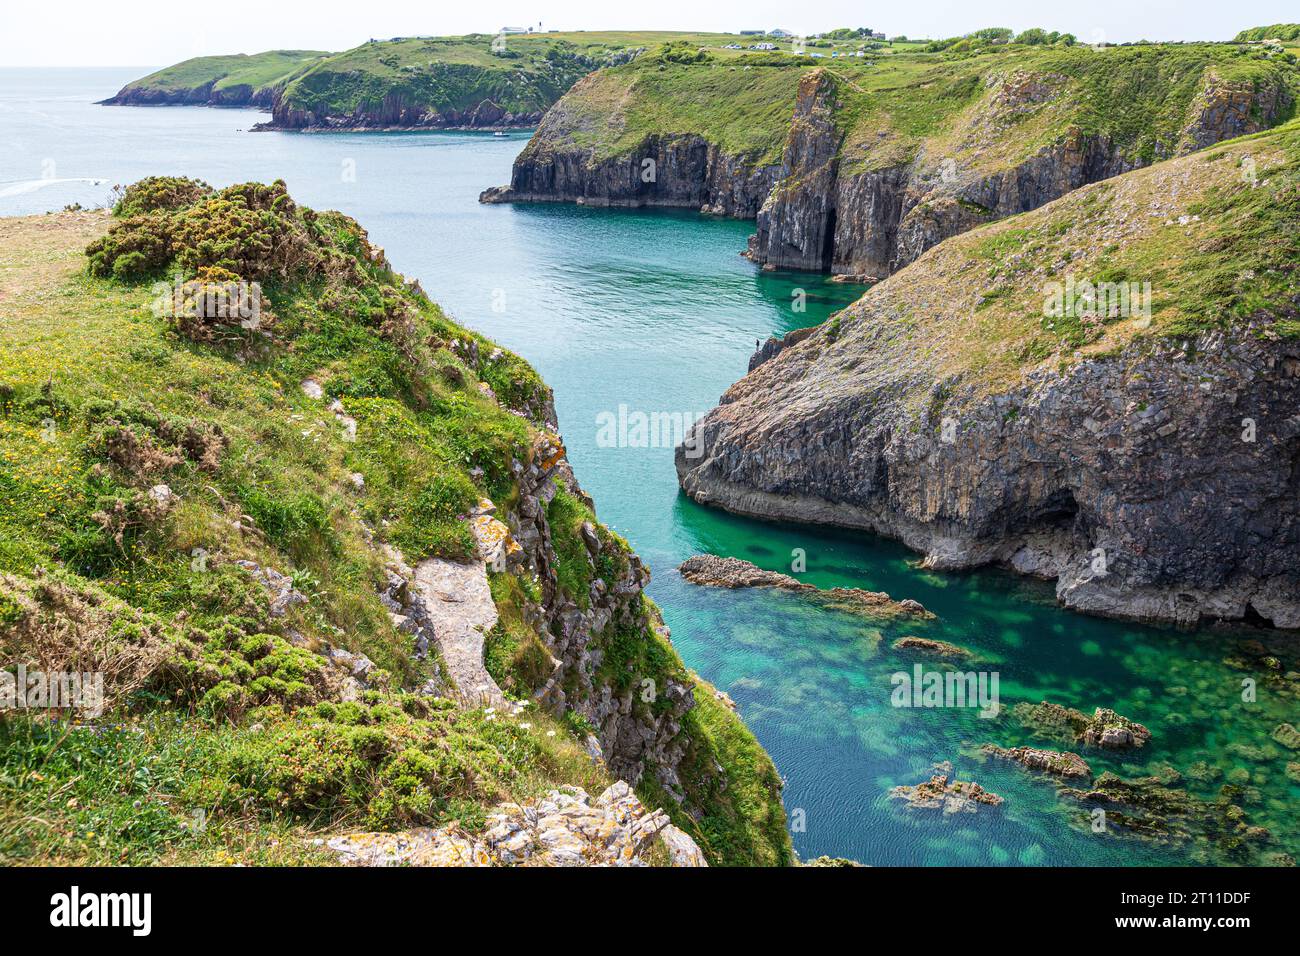 Skrinkle Haven, Lydstep nel Pembrokeshire Coast National Park, West Wales, Regno Unito Foto Stock